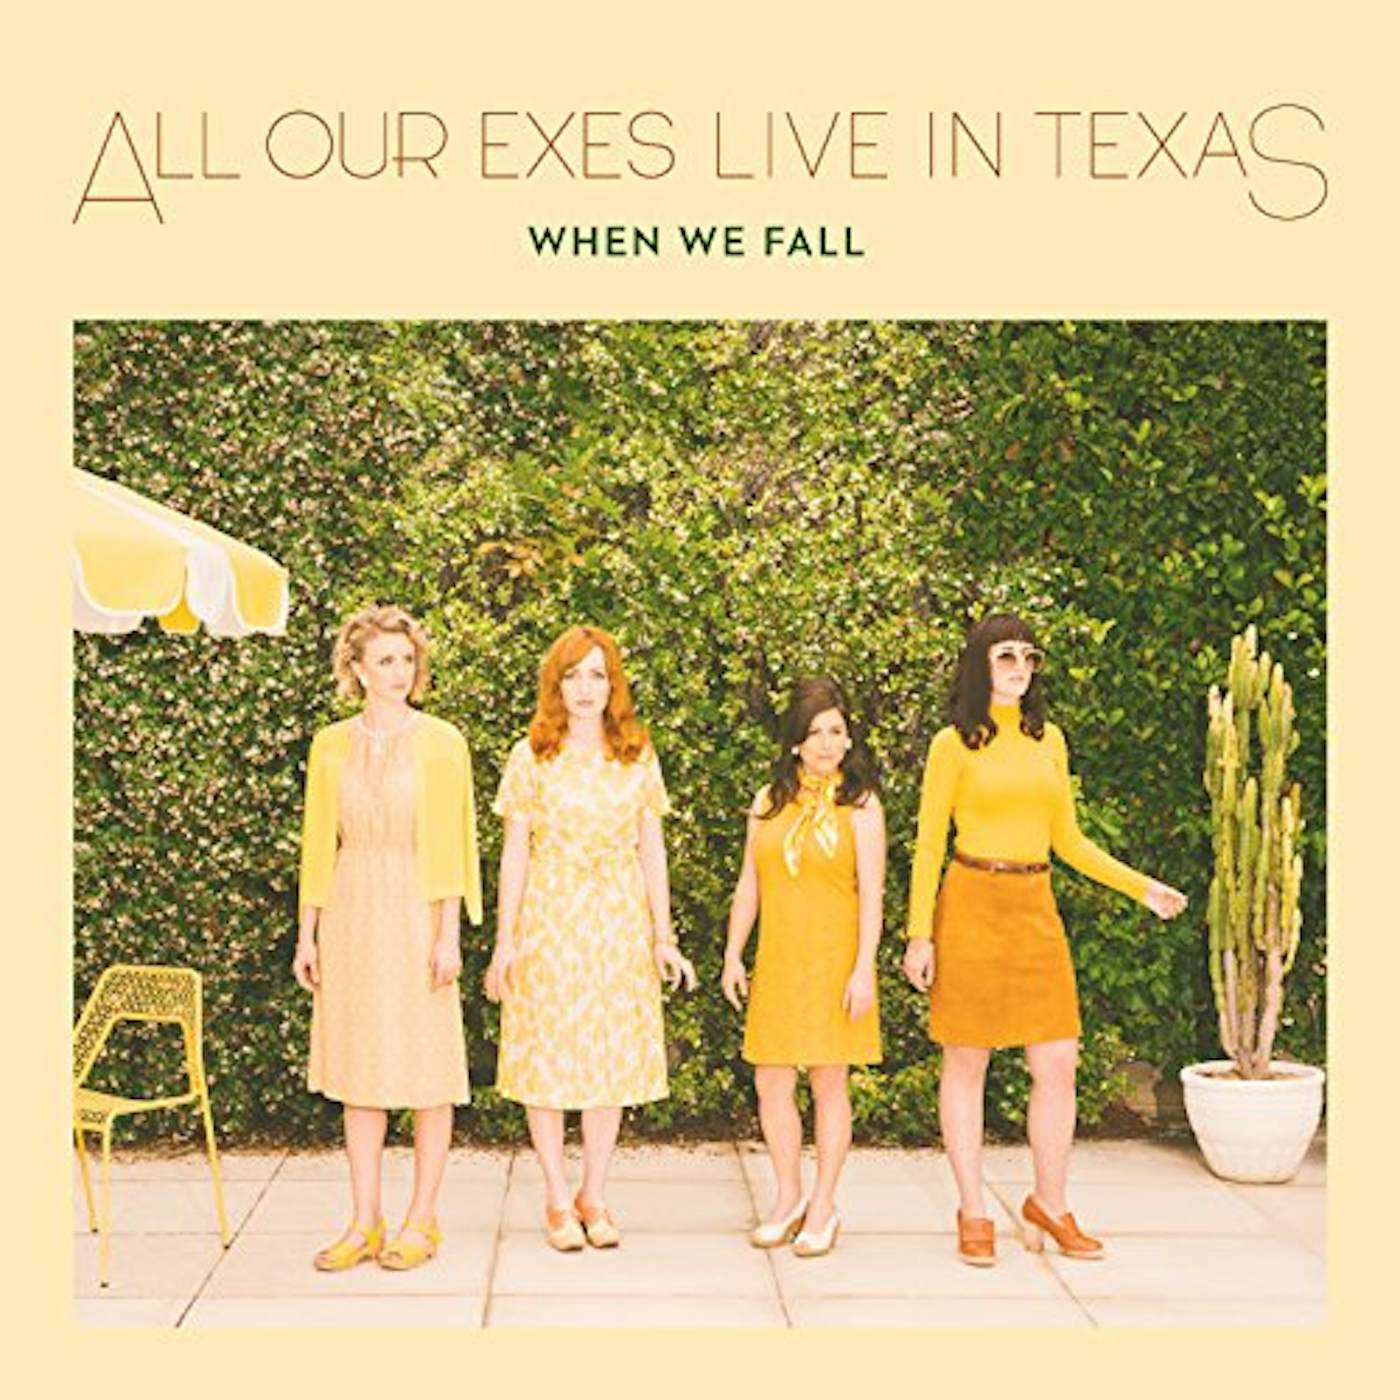 All Our Exes Live in Texas When We Fall Vinyl Record